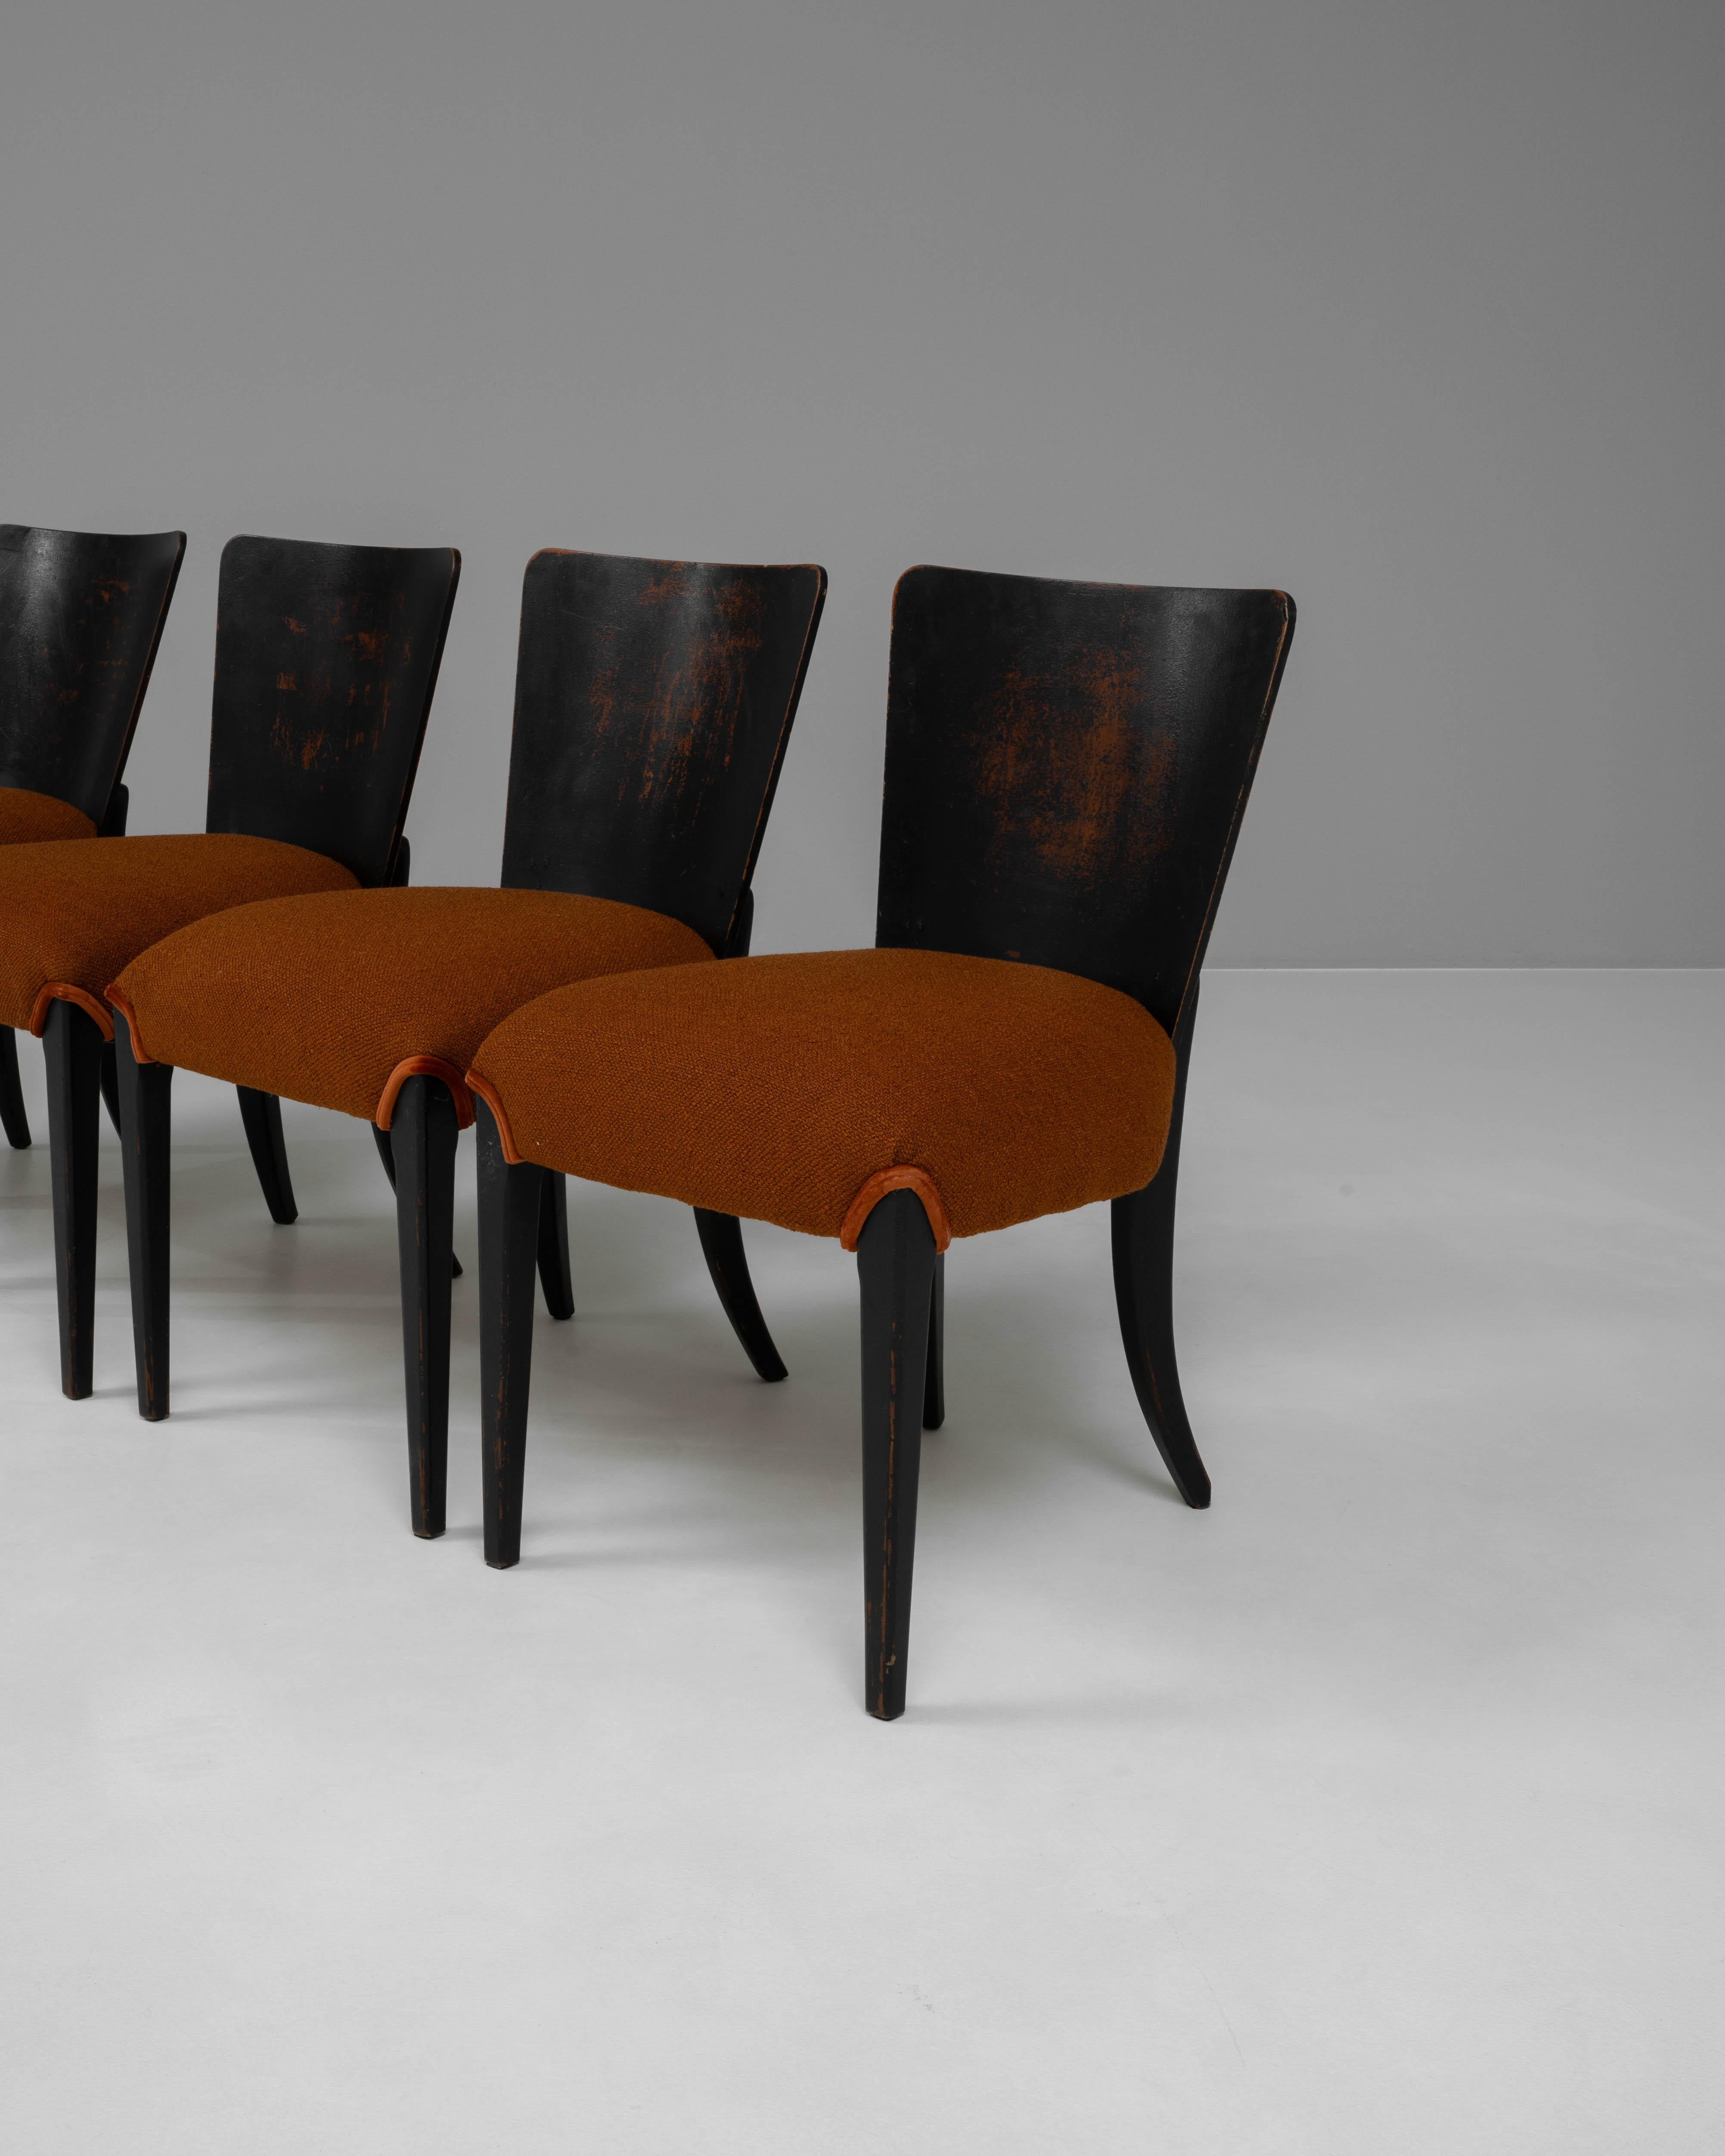 20th Century Czech Wooden Dining Chairs With Upholstered Seats By J. Halabala 7